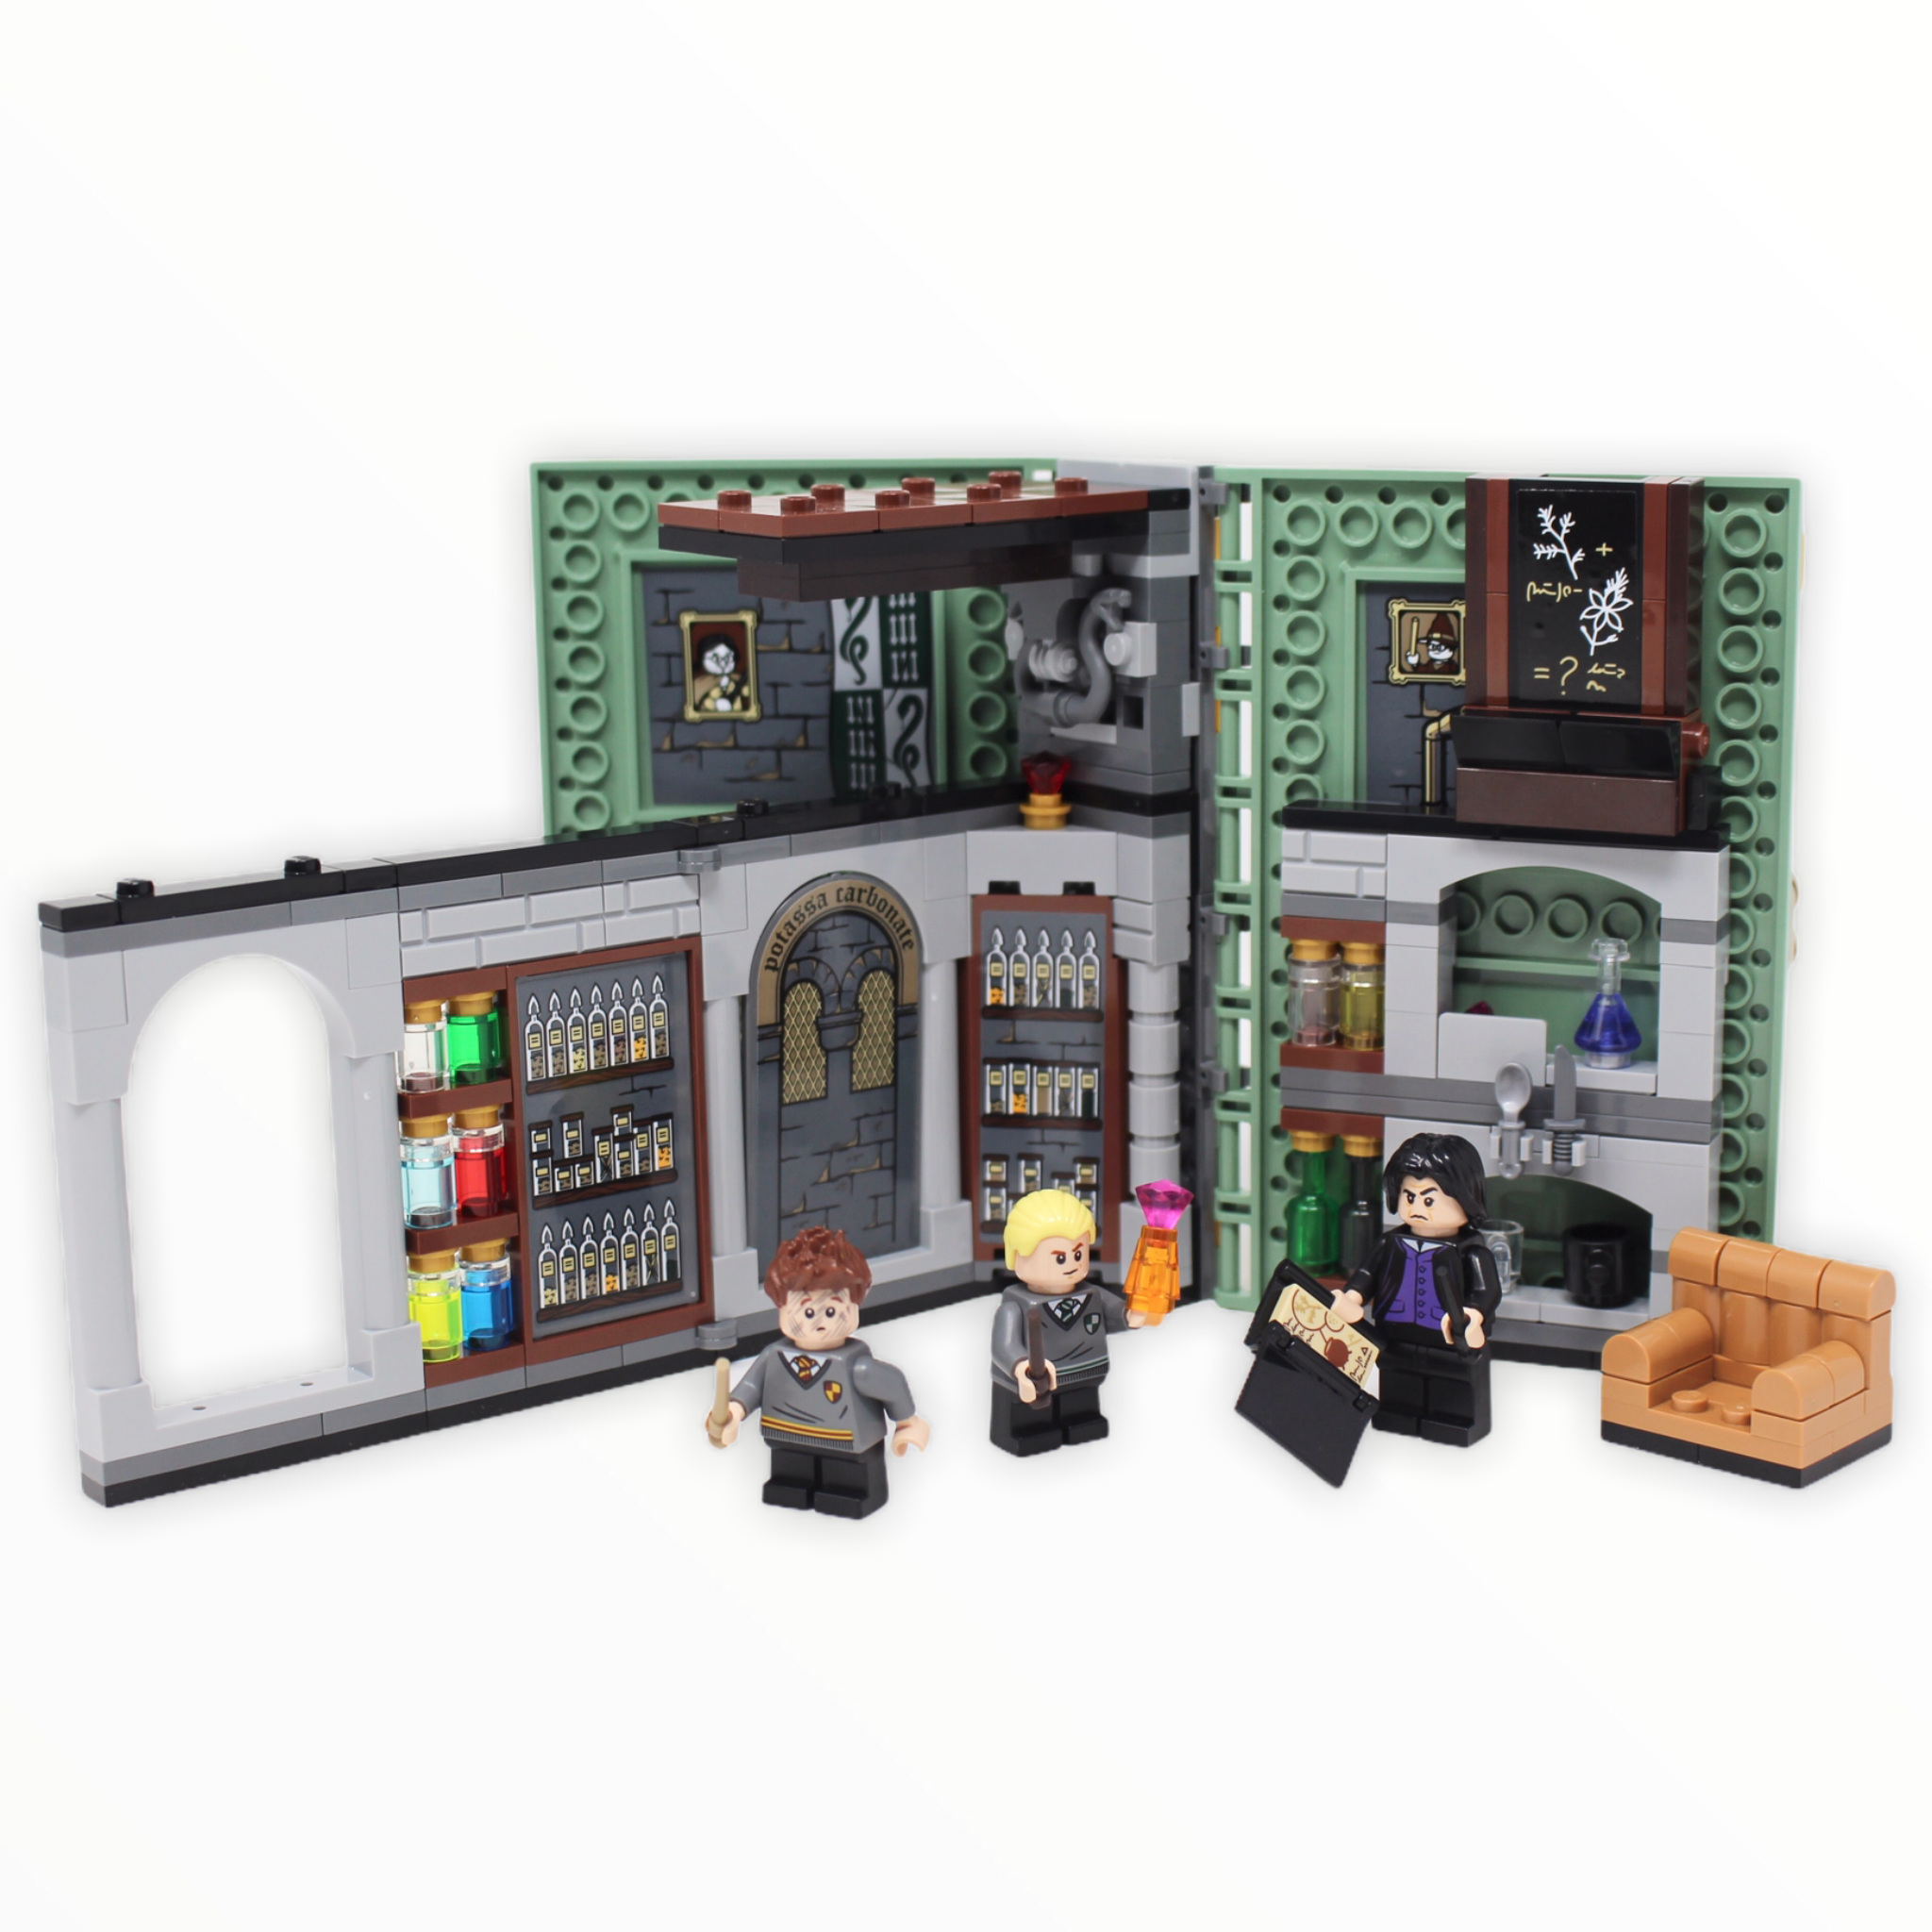 Used Set 76383 Harry Potter Hogwarts Moment: Potions Class